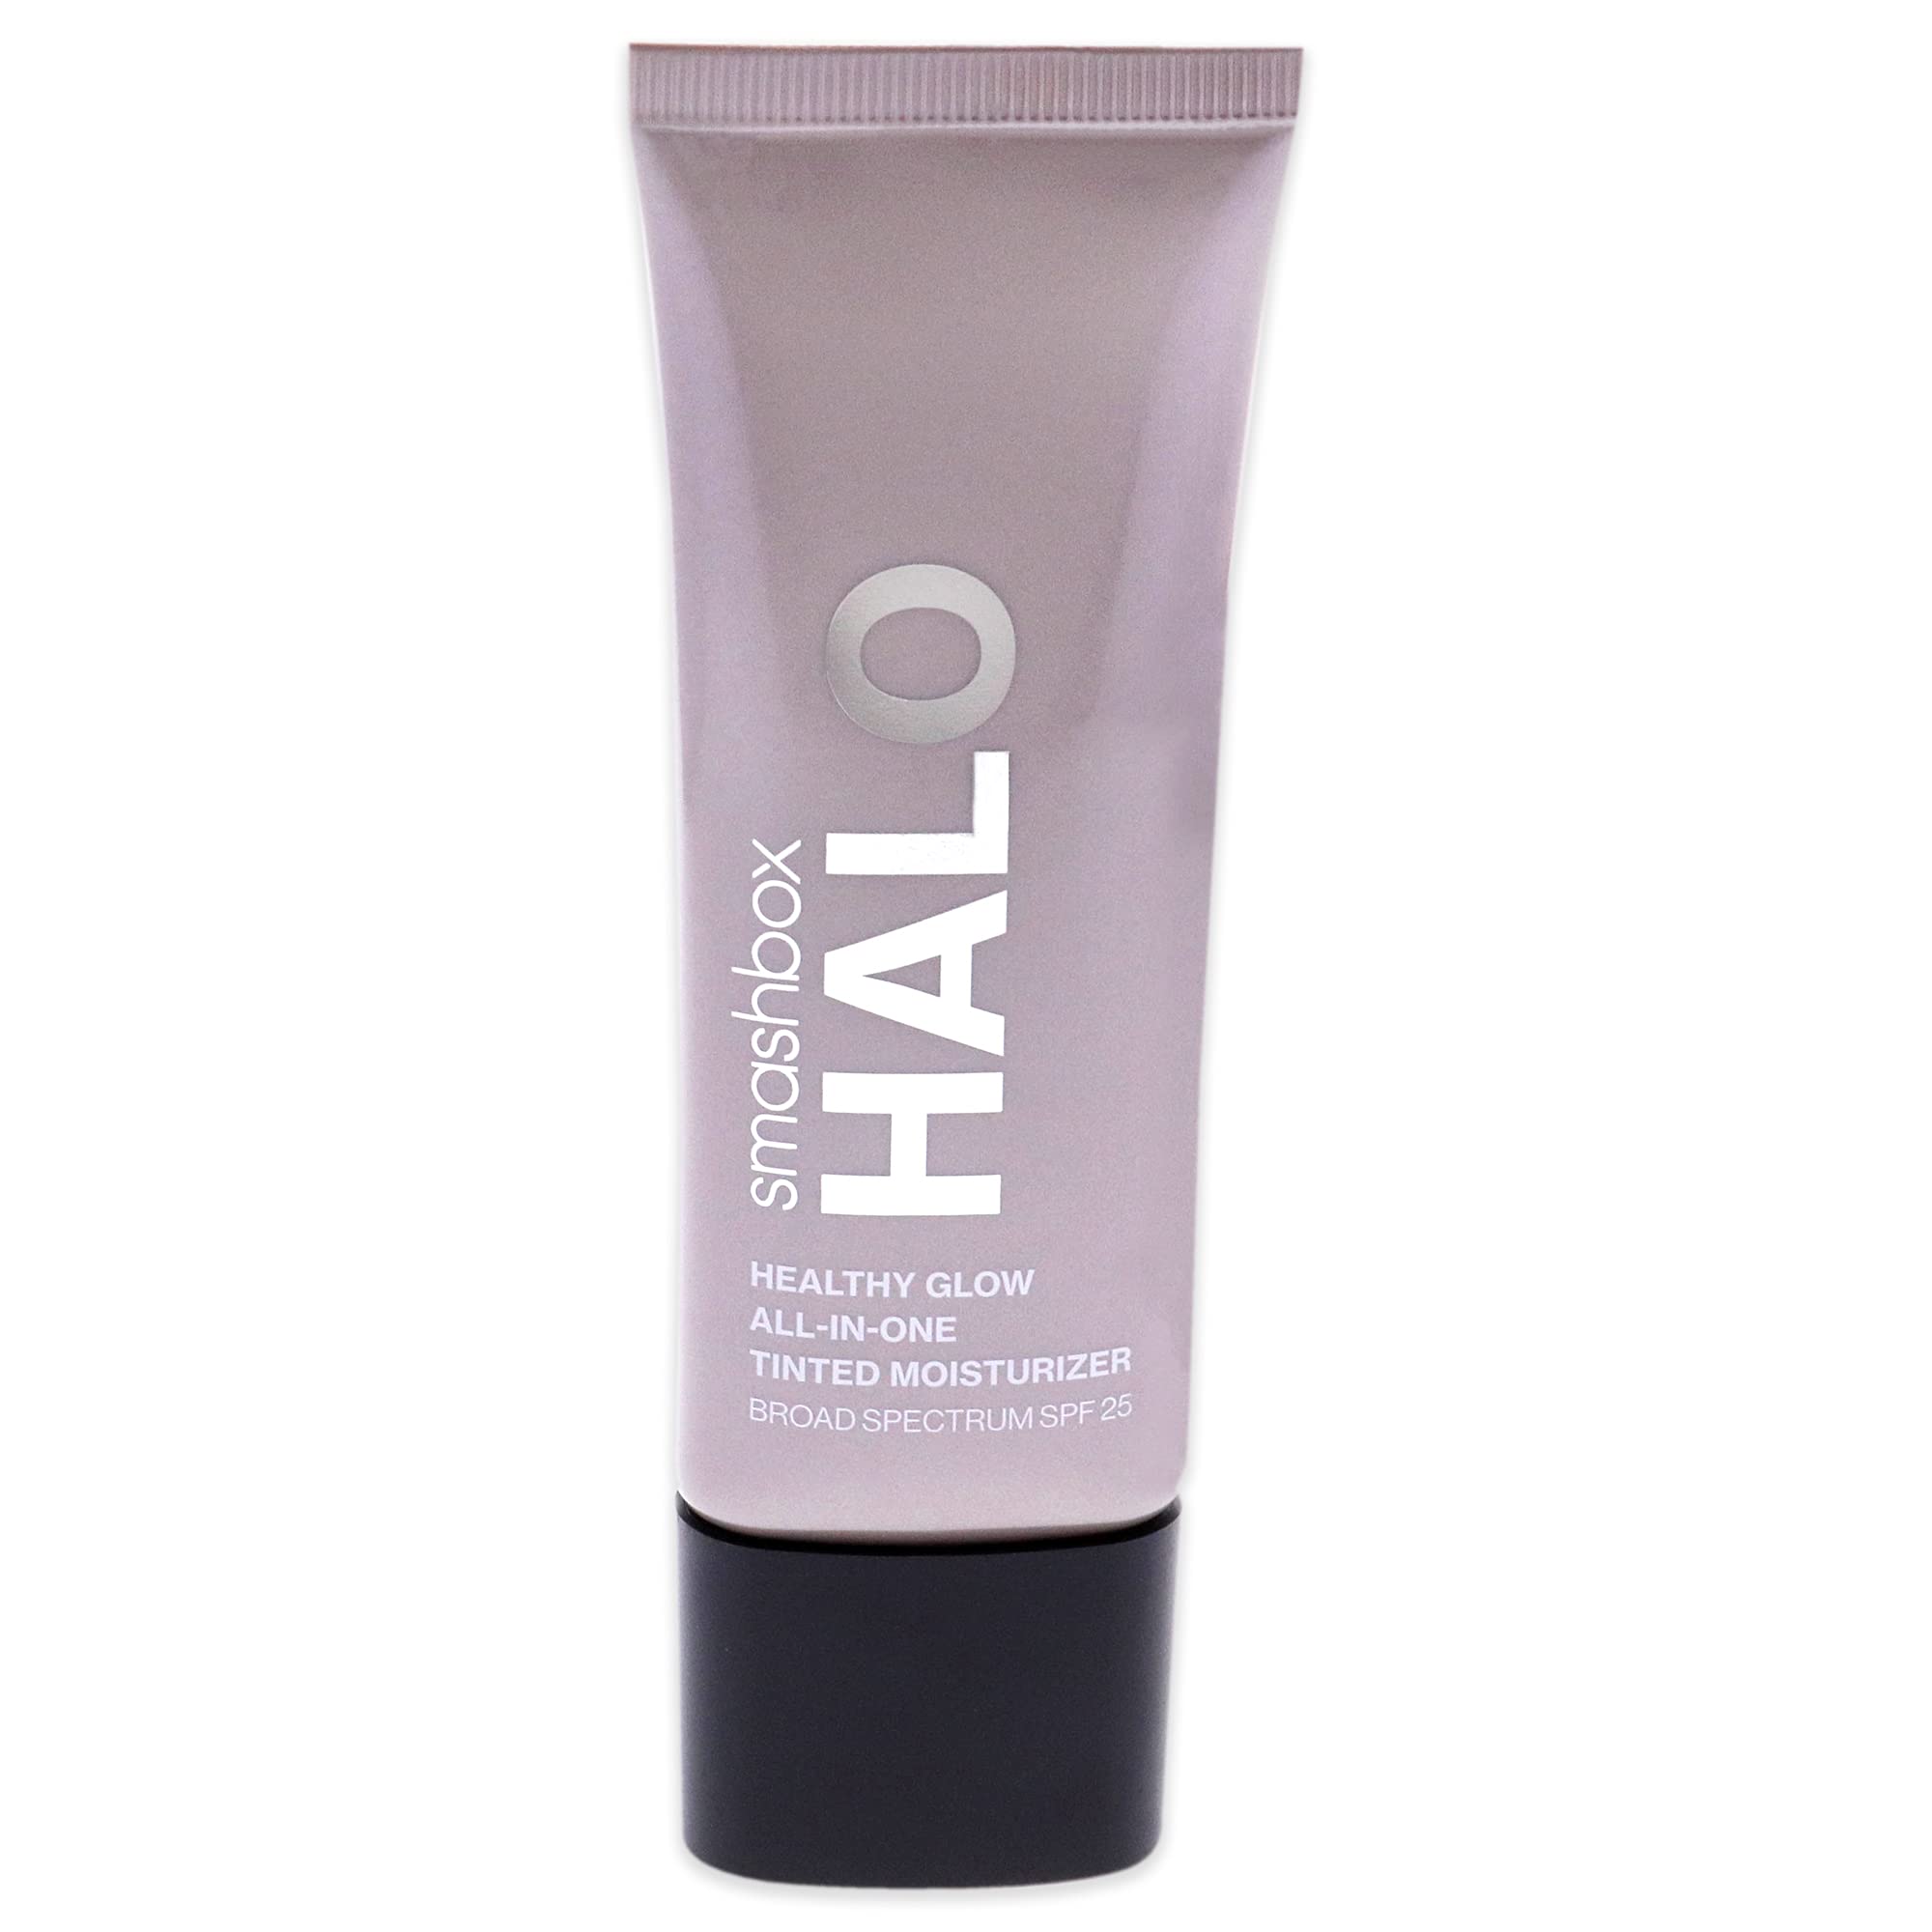 Halo Healthy Glow All-In-One Tinted Moisturizer SPF 25 with Hyaluronic Acid, Light to Medium Coverage, Dewy Finish, Oil-free, Sweat and Humidity Resistant